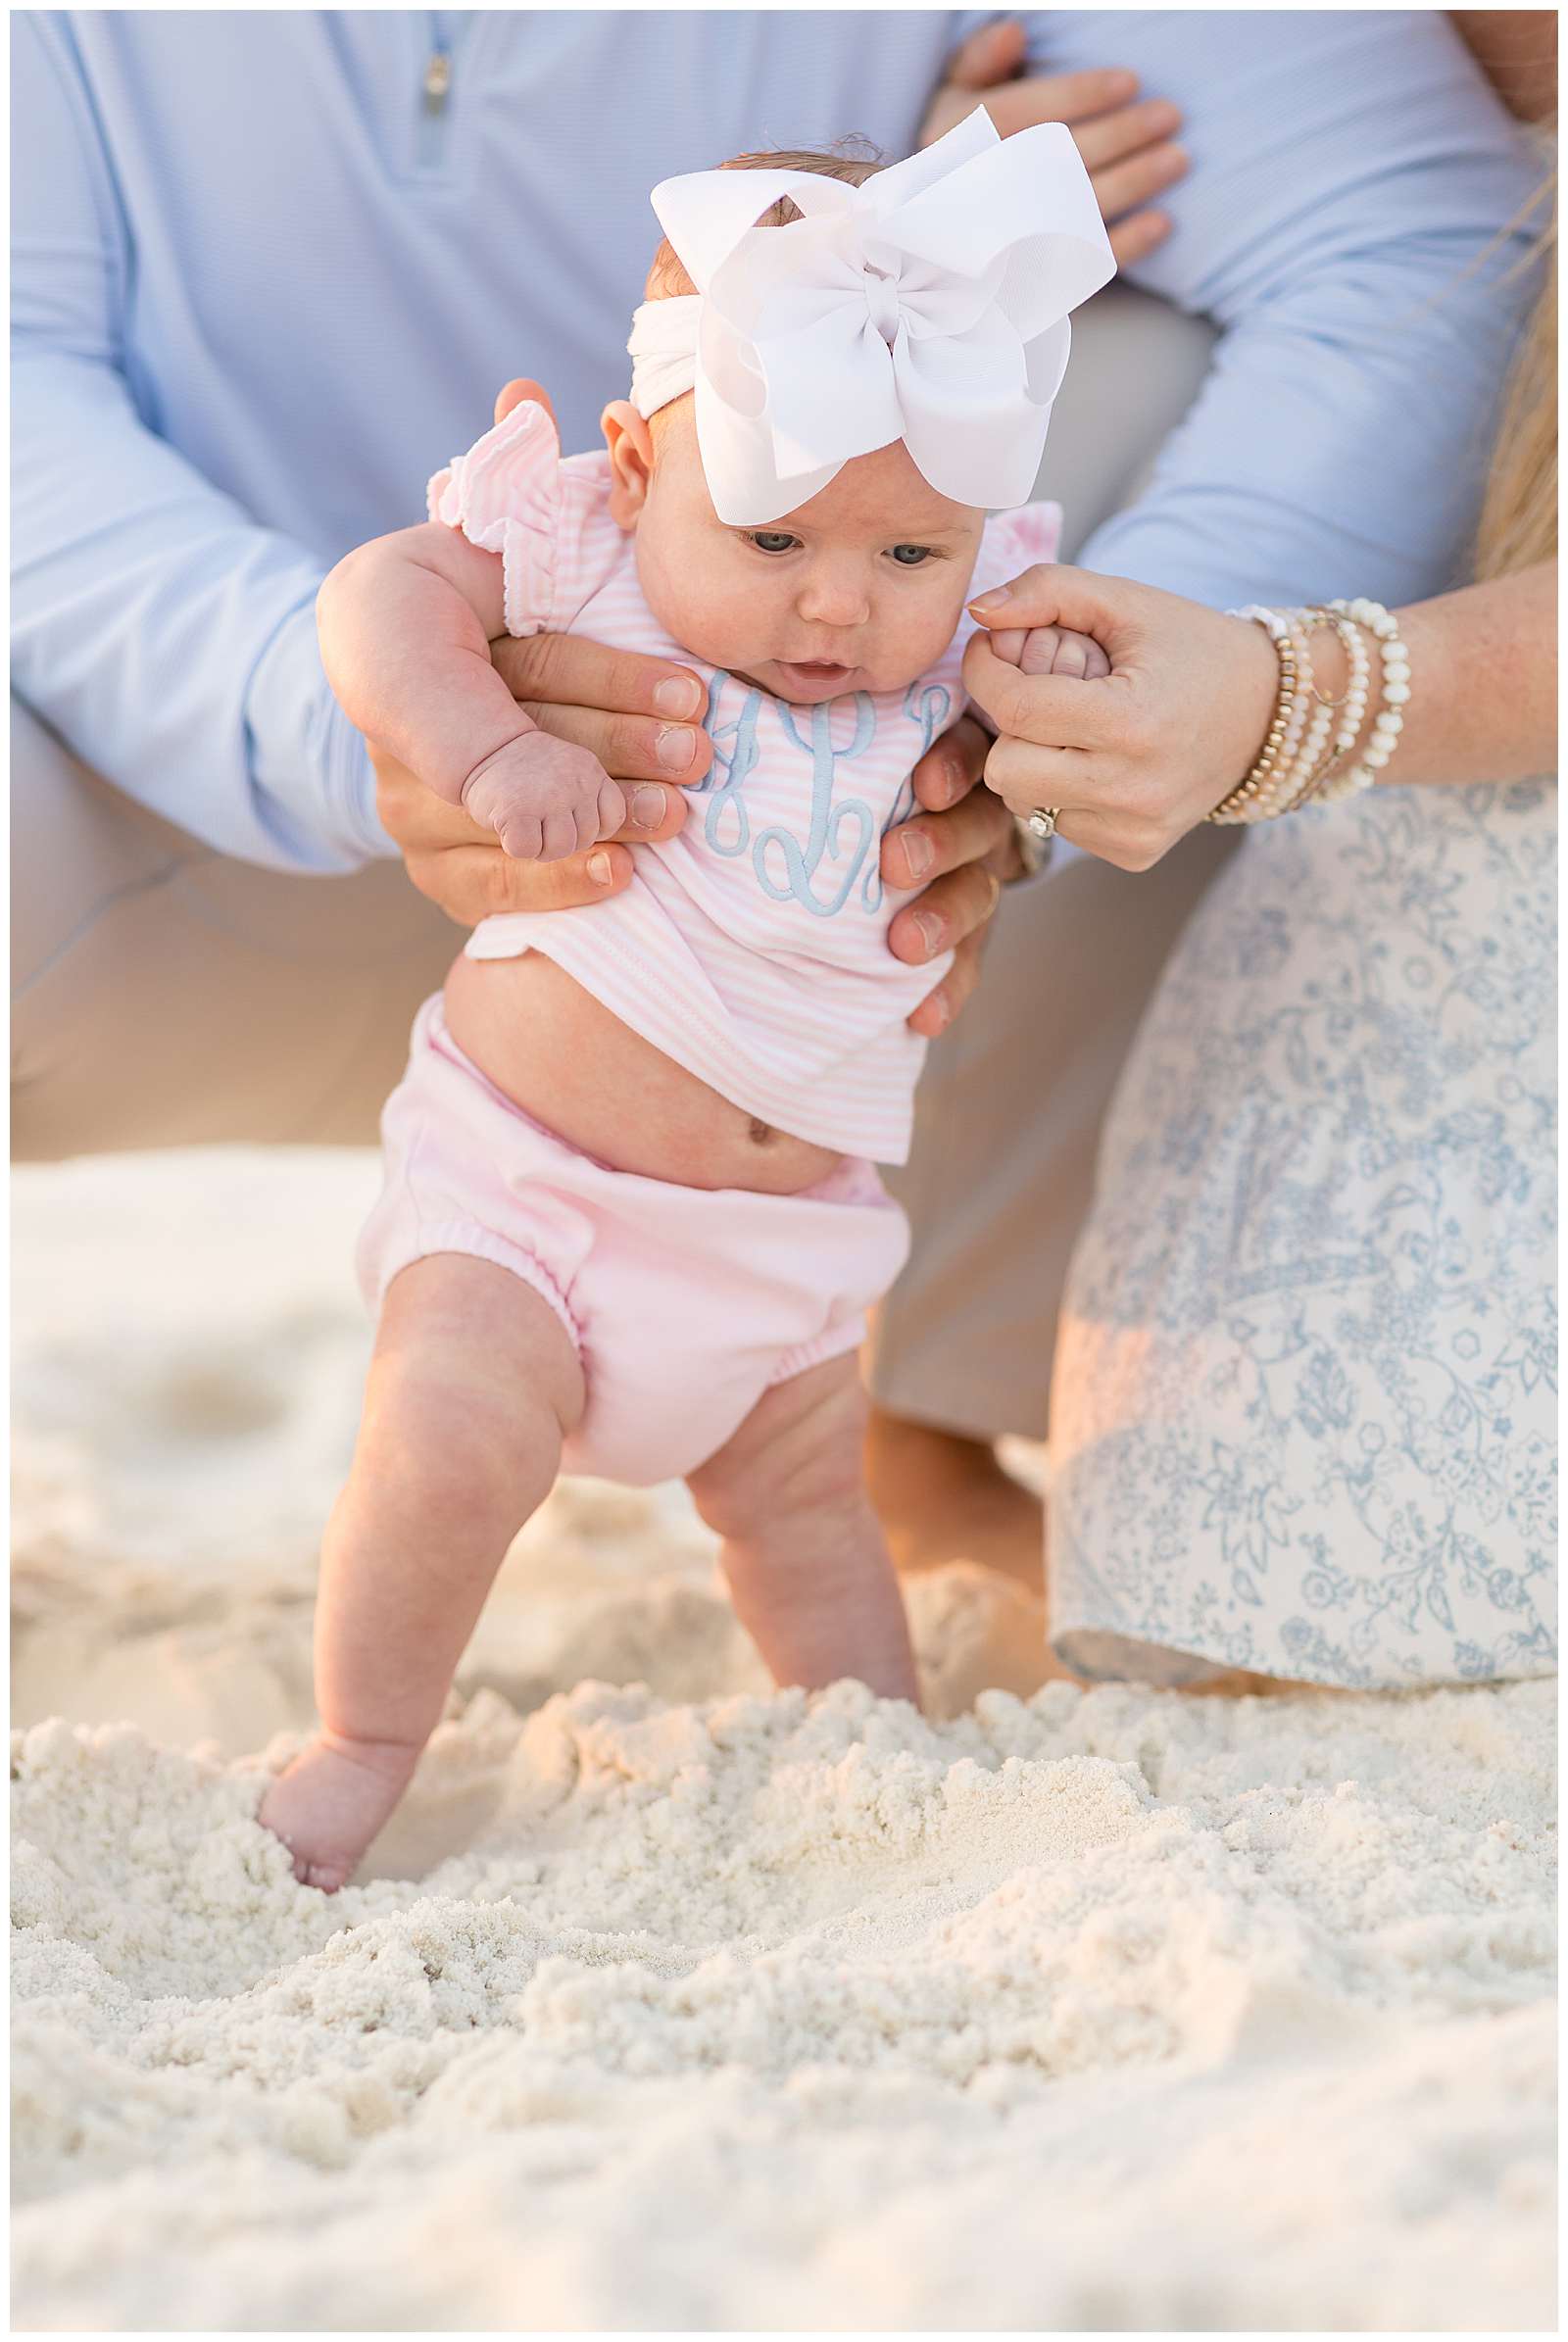 Sweet baby girl who wears a monogrammed, pink and white stripped outfit, puts her toes in the sand and is being held up by her Dad and Mom who we see their hands in the image.  Click to see more of this Rosemary Beach family session from Rebecca Rice Photo! - rebeccaricephoto.com